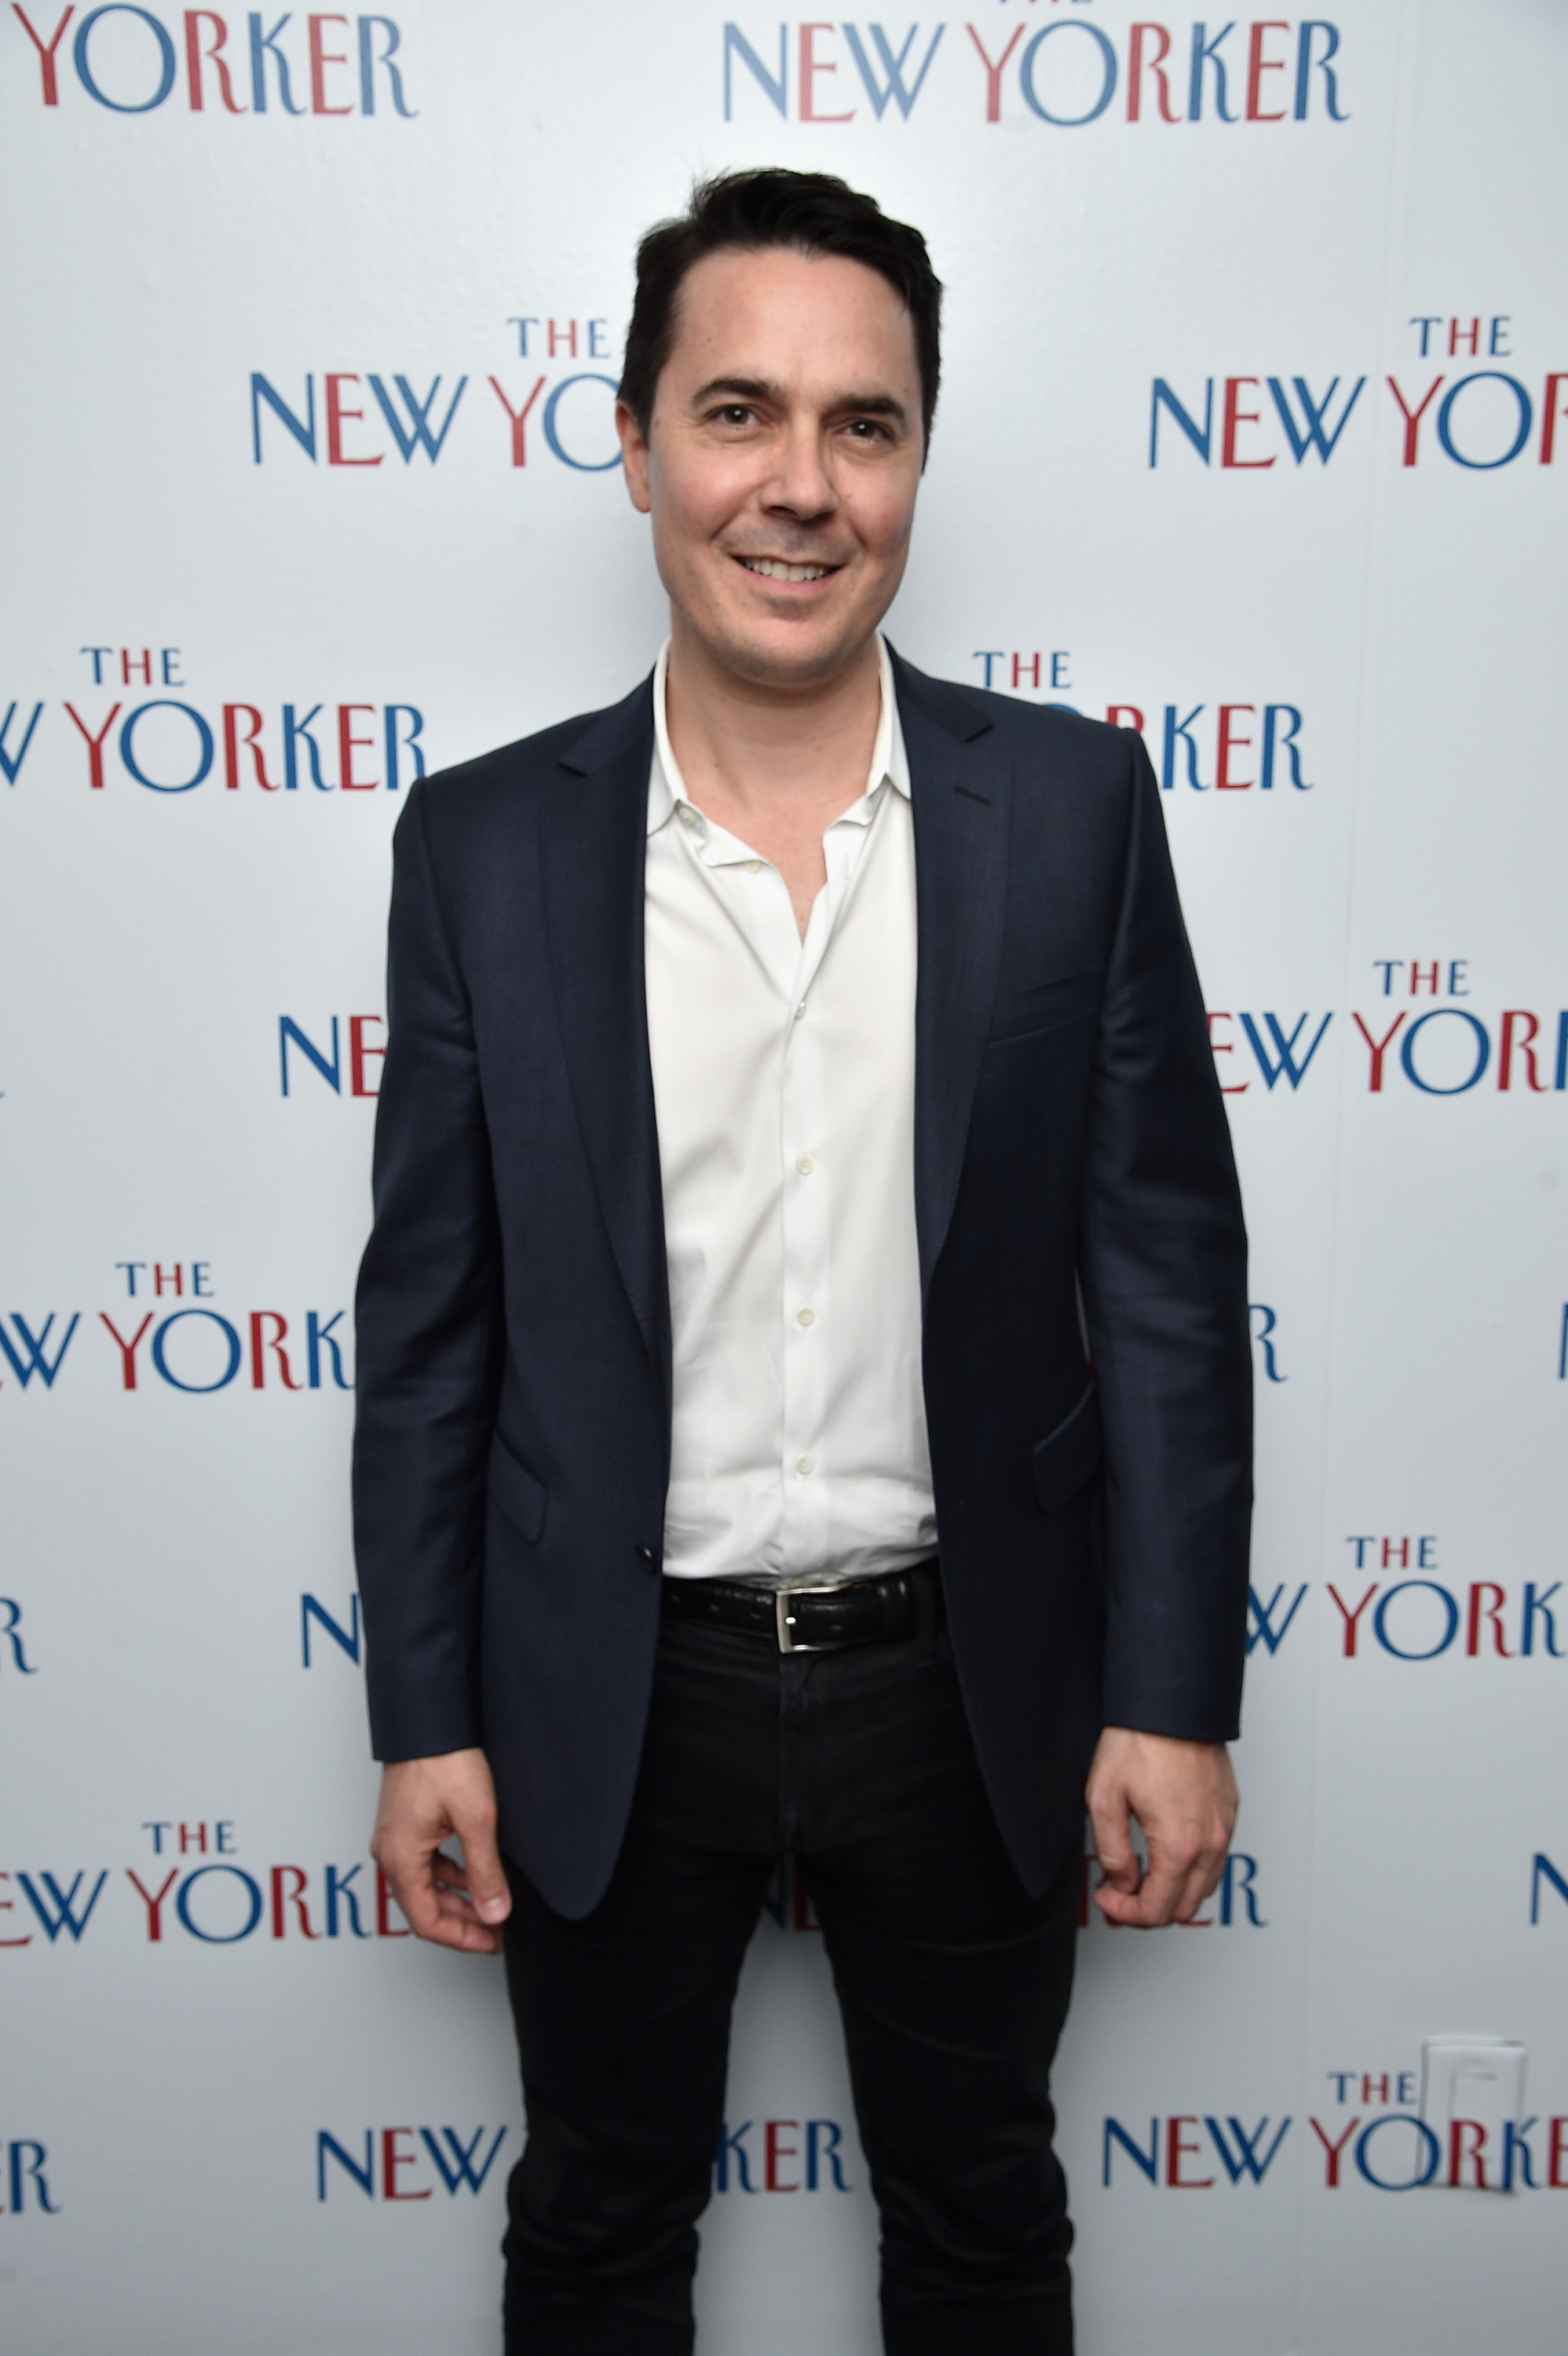 The New Yorker's David Remnick Hosts The Magazine's Annual Party Kicking Off The White House Correspondents' Association Dinner Weekend